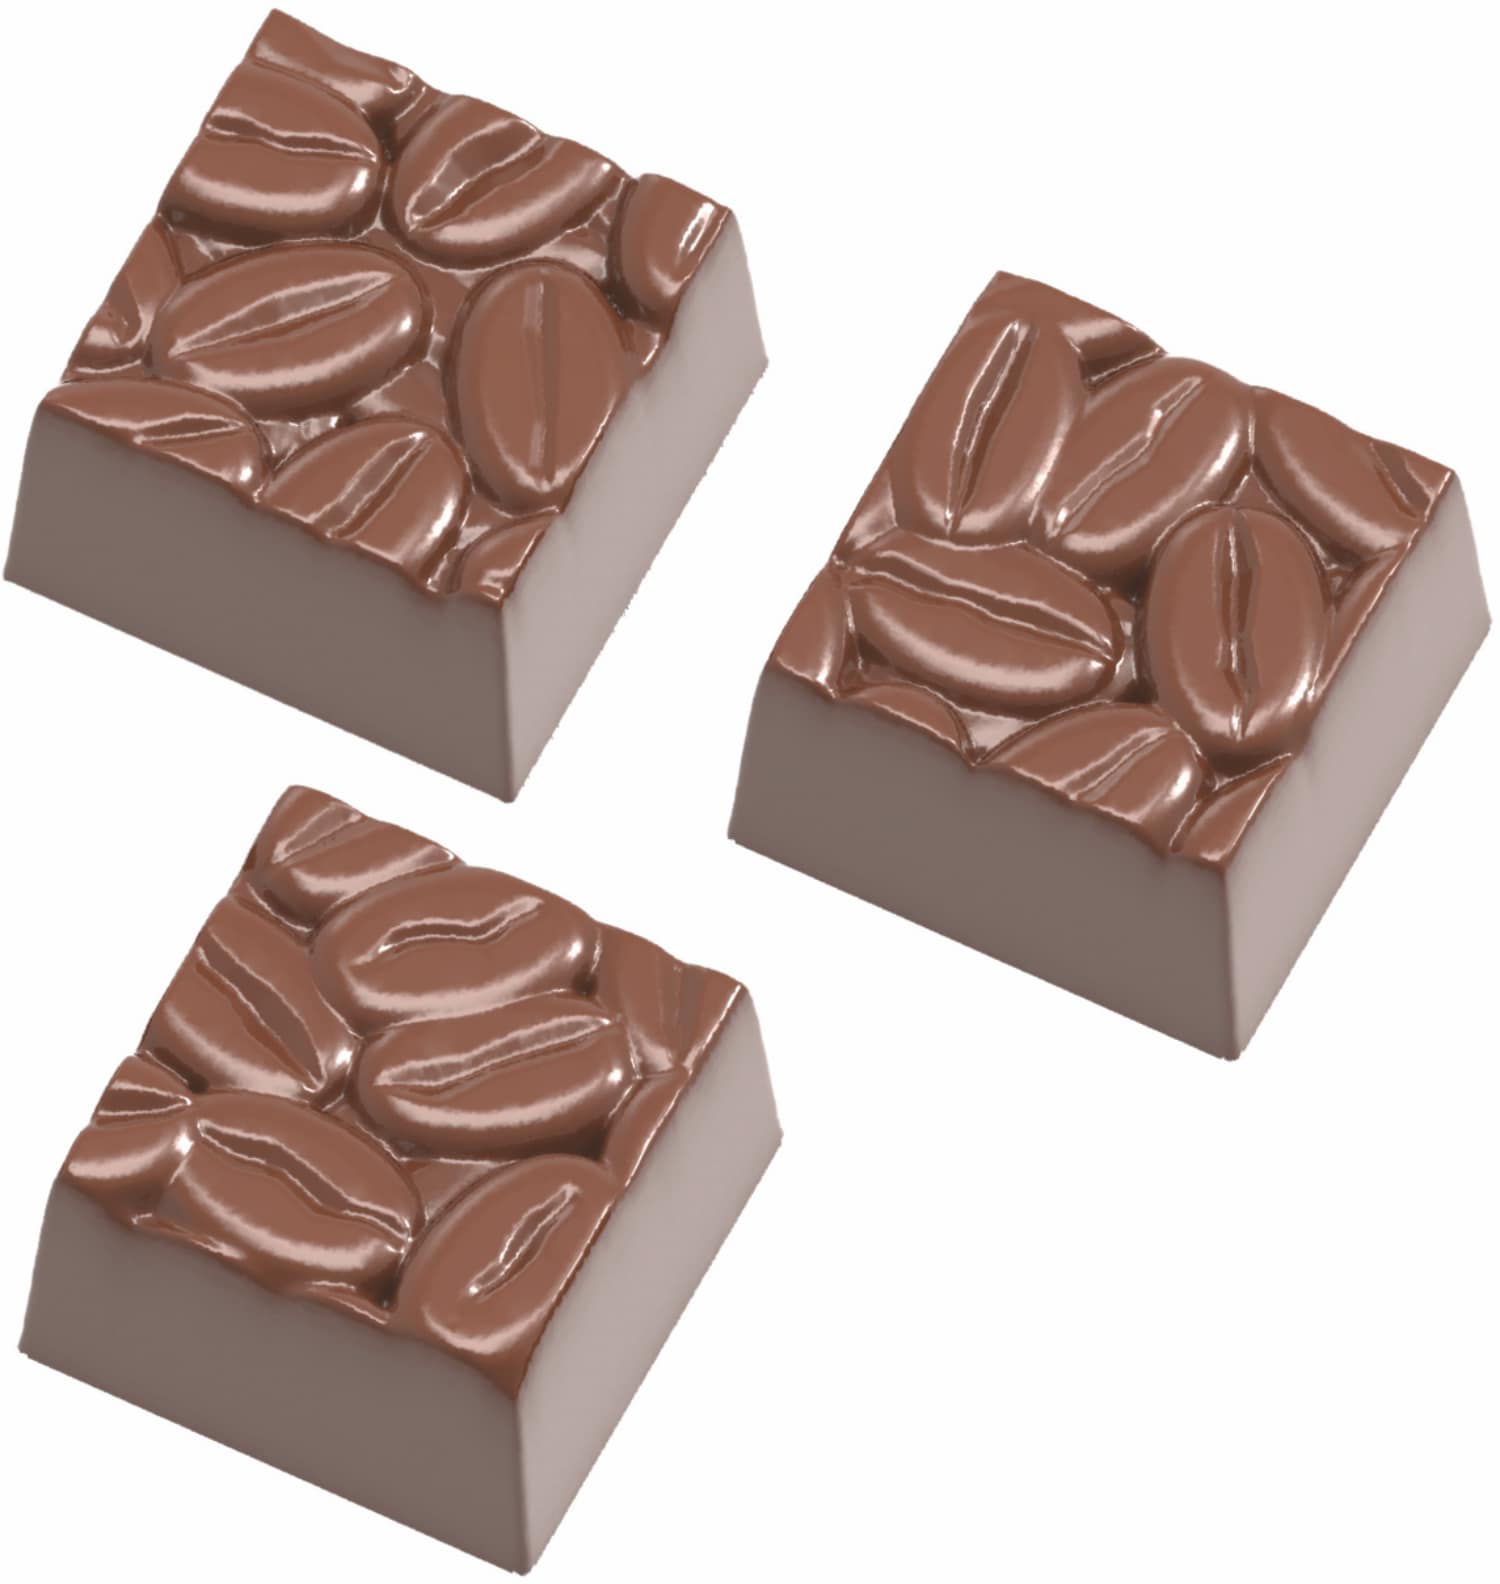 Chocolate mould "Coffee beans" 421877